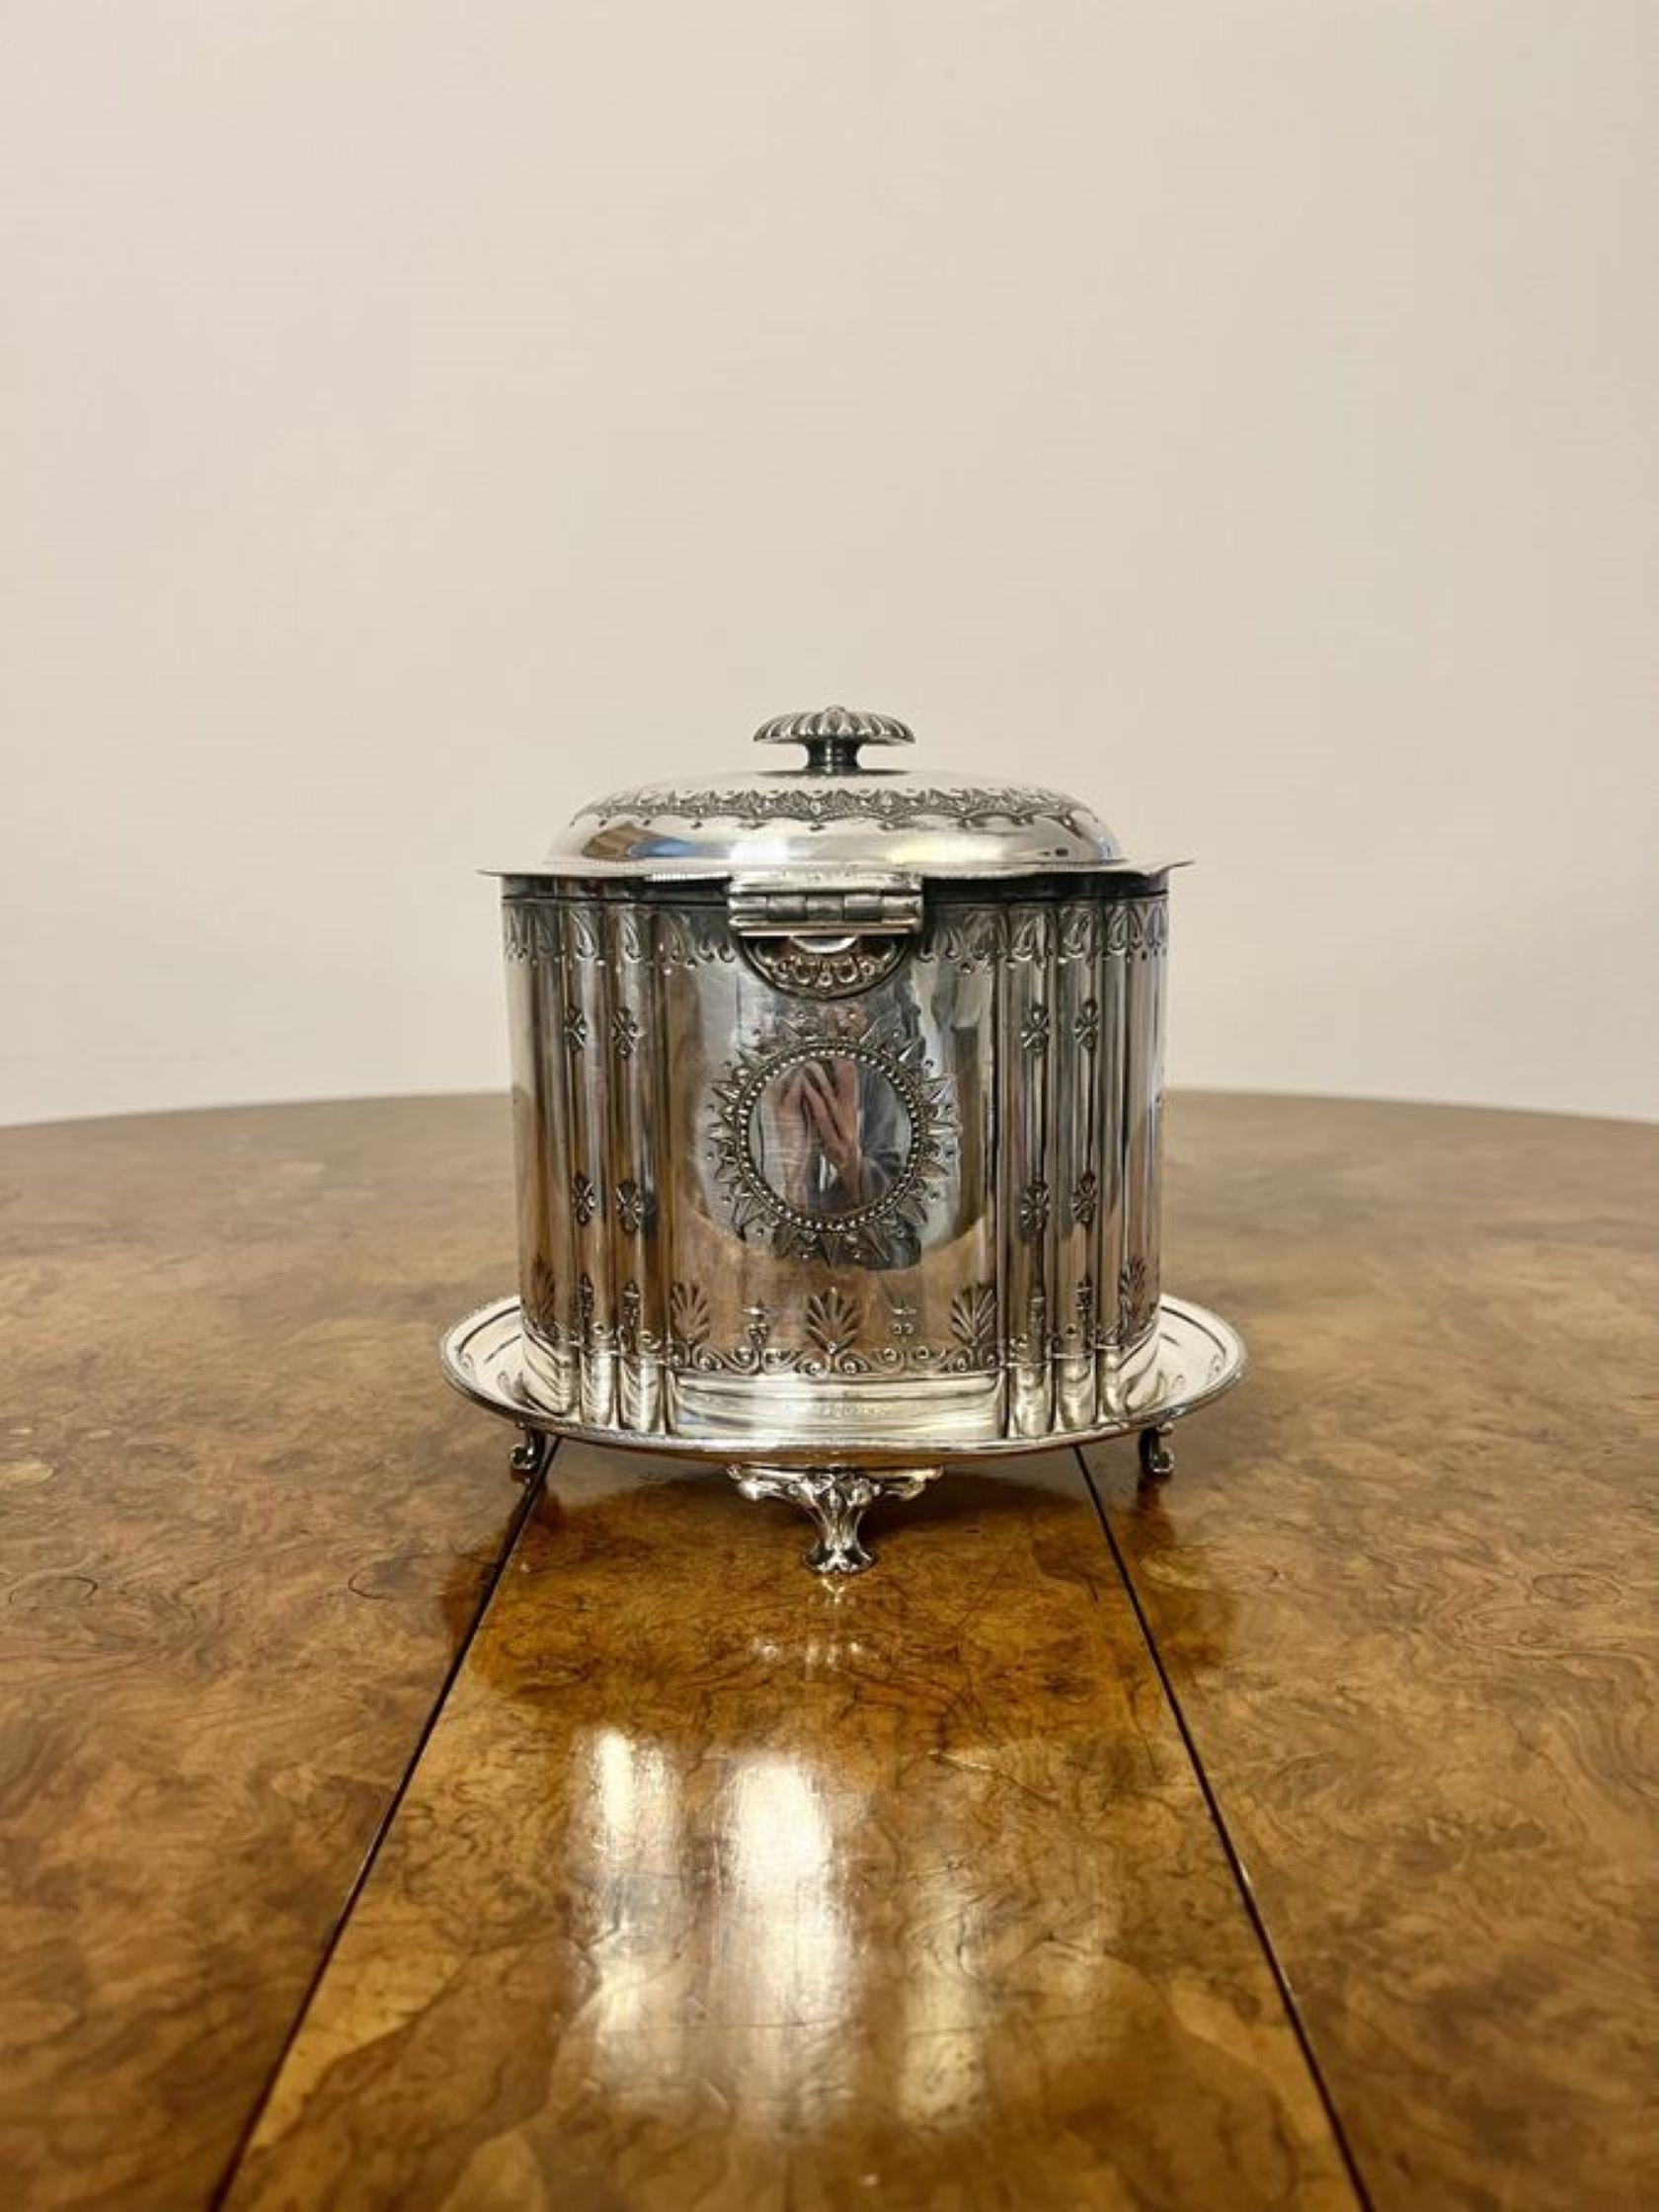 Stunning antique Victorian silver plated biscuit barrel having a quality antique Victorian silver plated biscuit barrel with fantastic quality ornate detail with a lift up lid opening to reveal a storage compartment with a circular base raised on